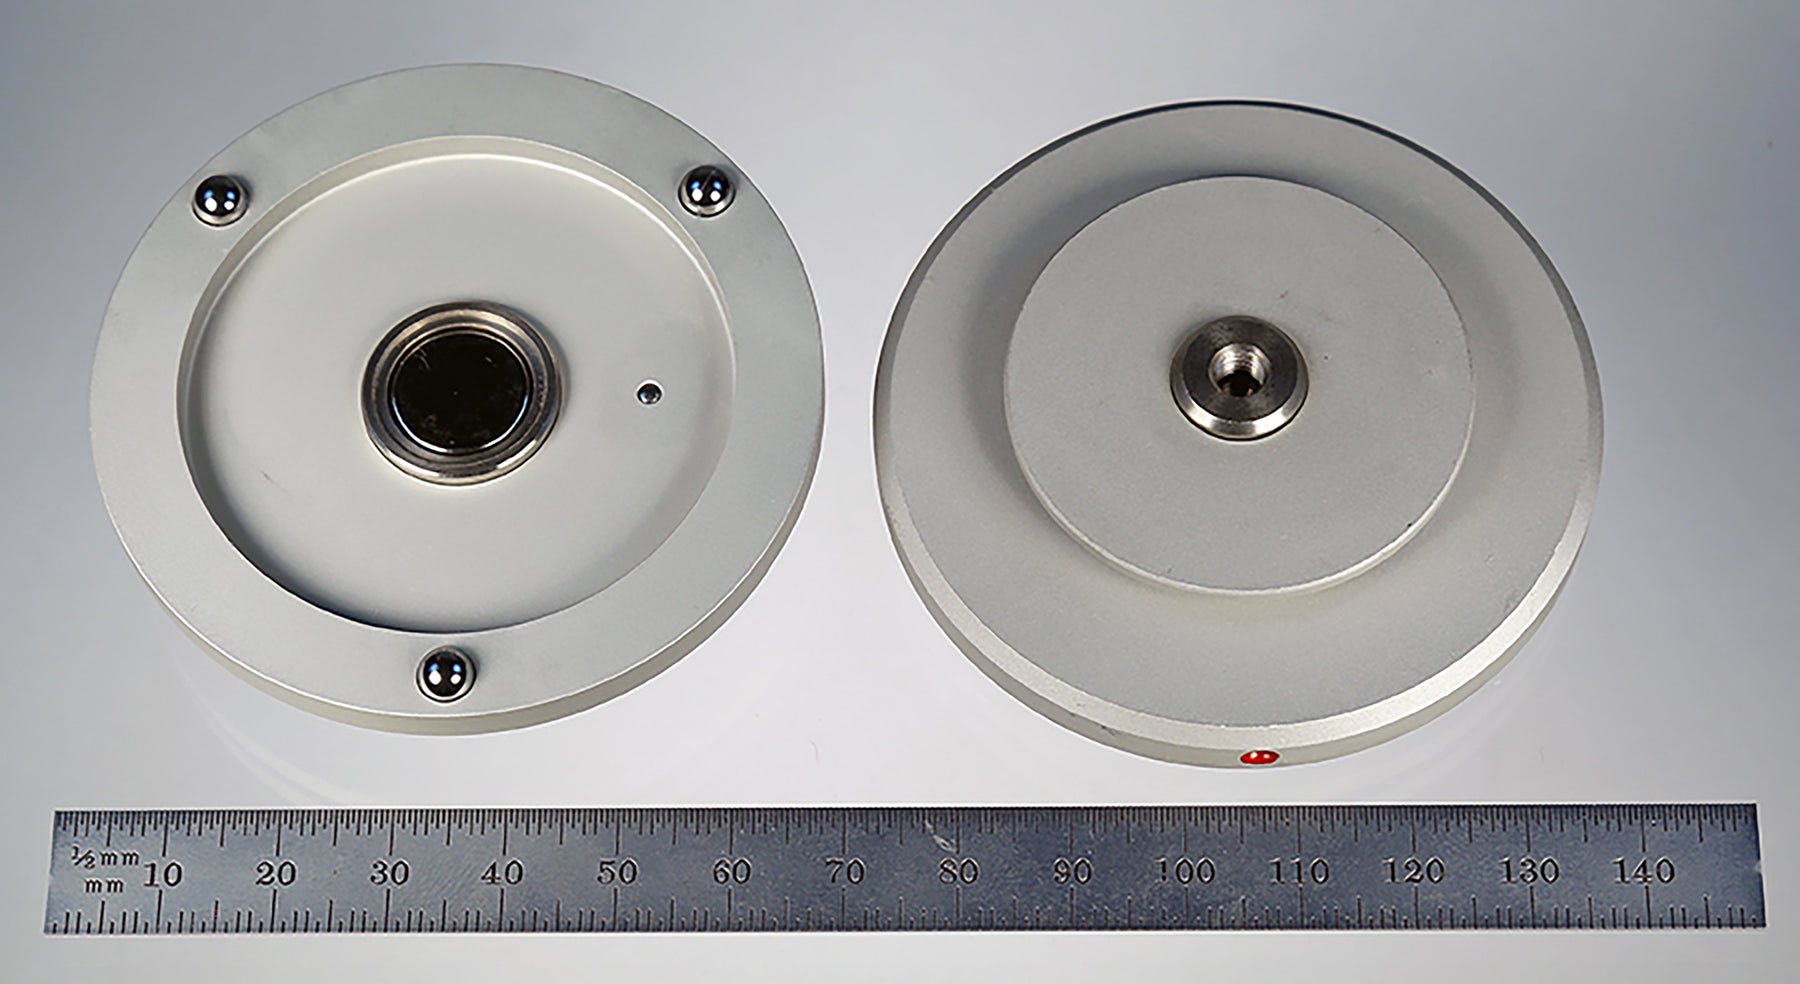 Gear measuring center adapter plate for Klingelnberg P26 and P40 systems.  Weight is 63.73 grams.